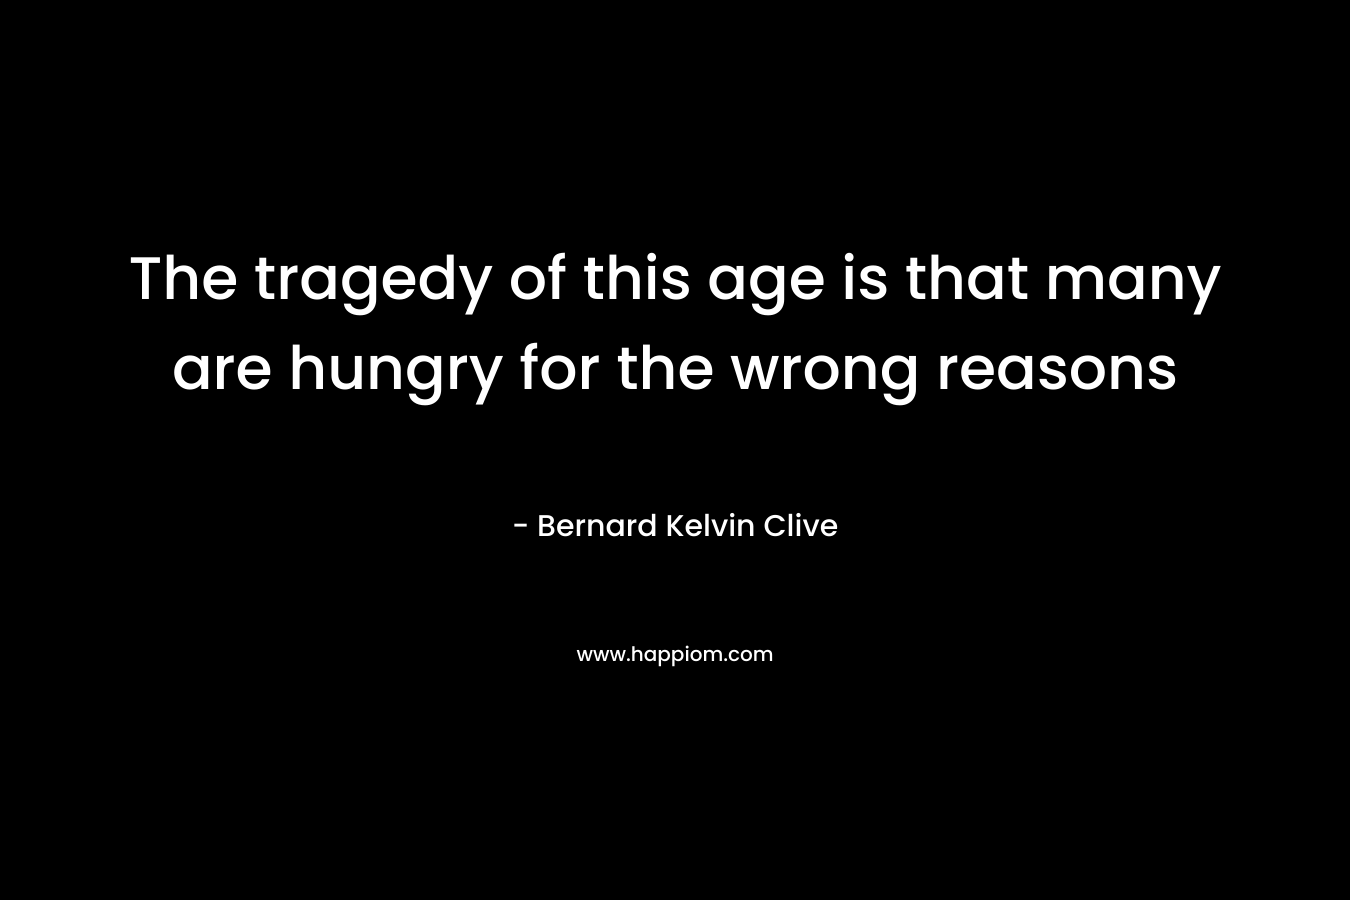 The tragedy of this age is that many are hungry for the wrong reasons